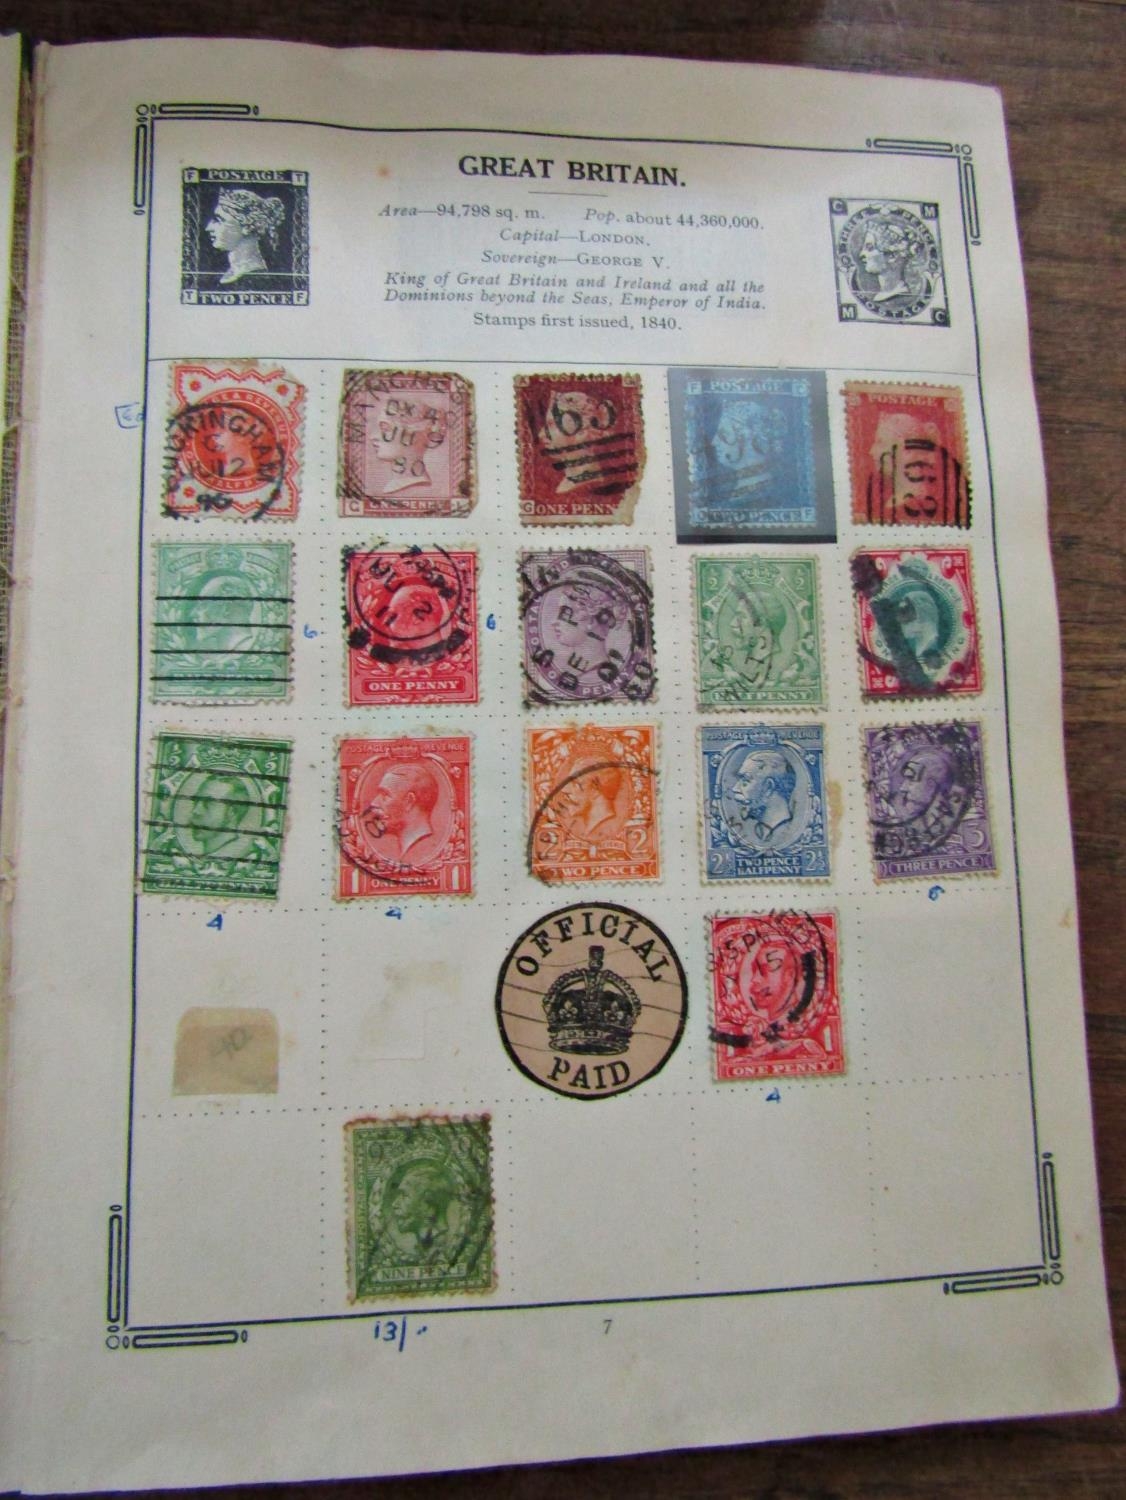 A stamp book containing British and worldwide stamps including a penny red and two penny blue - Image 2 of 3